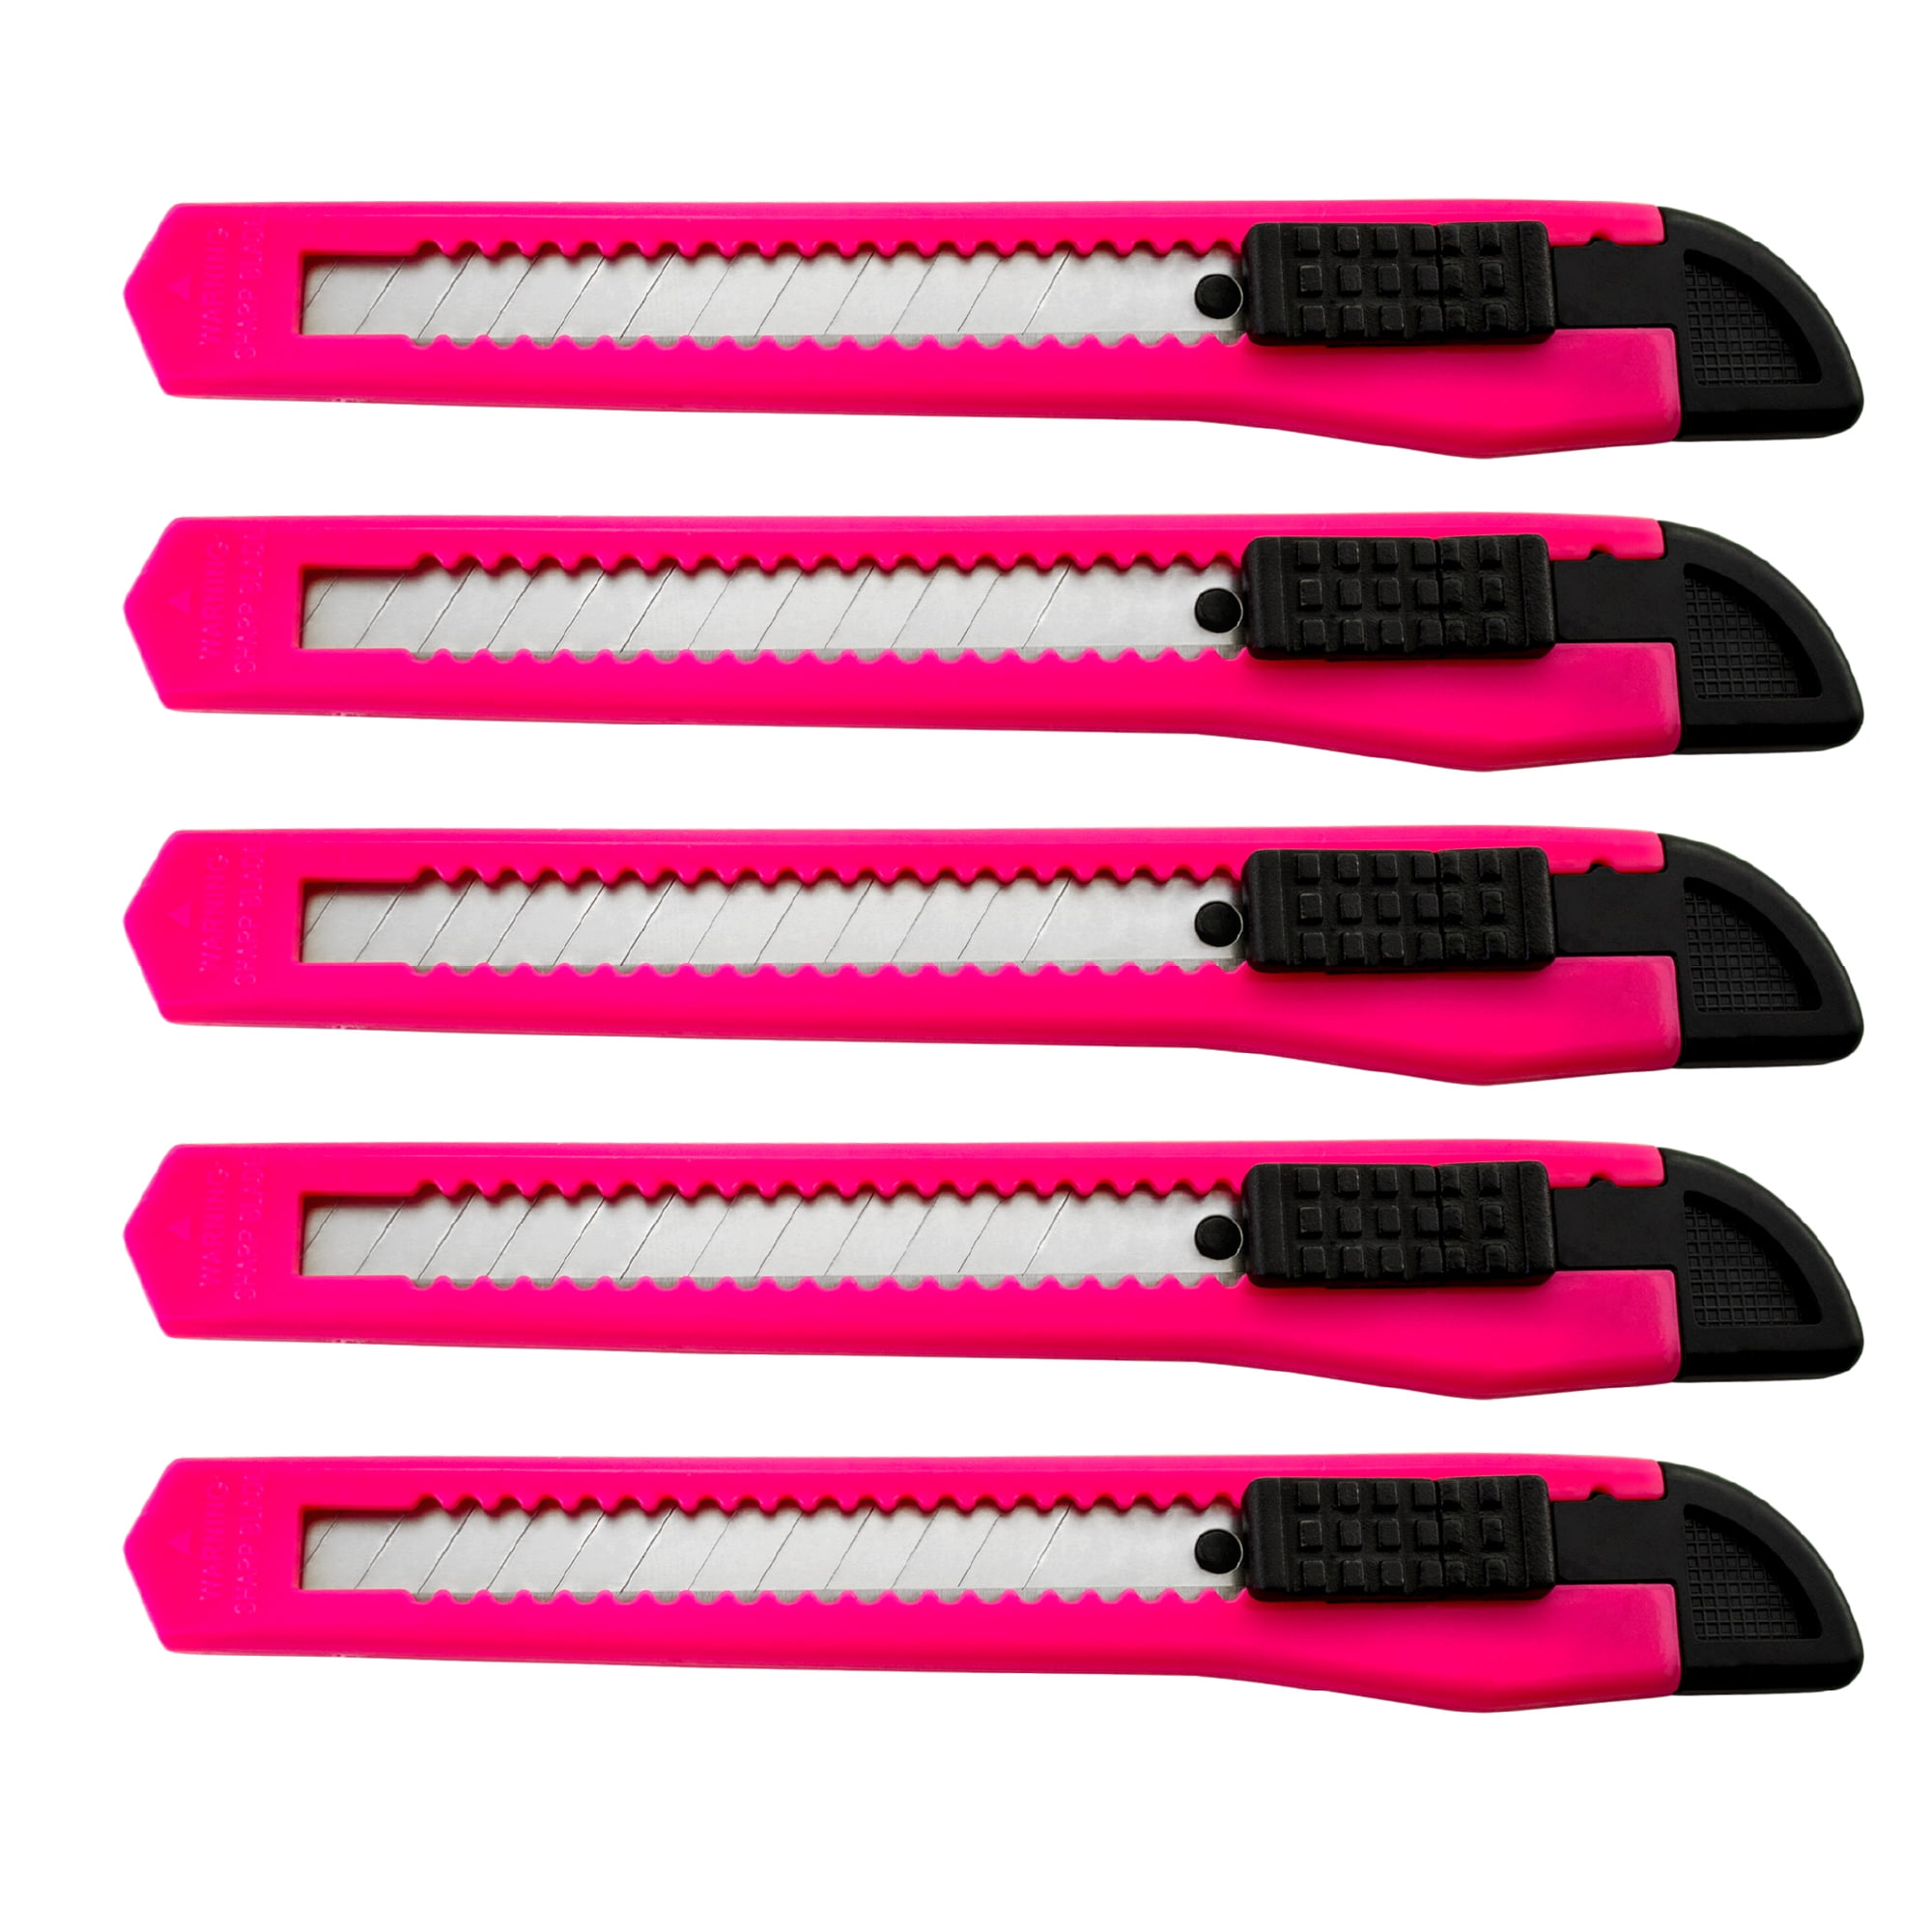 2 x Pink Utility Knife Box Cutter Ladies Snap Off Blade Tool +